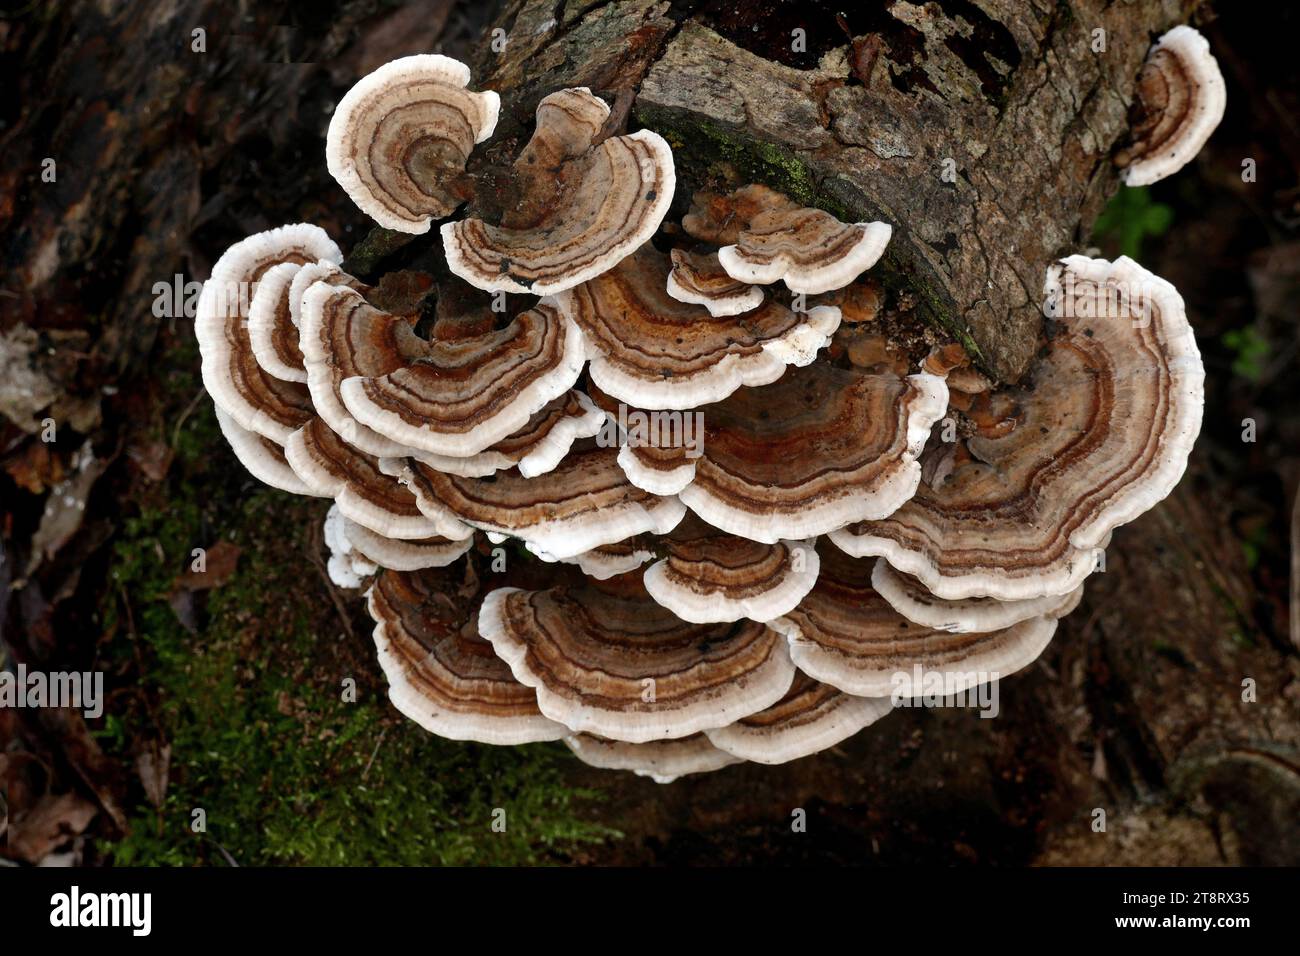 Turkey tail Fungus, Turkey Tails, (Trametes versicolor) fruiting body on rotting tree log, Trametes versicolor – also known as Coriolus versicolor and Polyporus versicolor – is a common polypore mushroom found throughout the world. Meaning 'of several colours', versicolor reliably describes this fungus that displays different colors Stock Photo